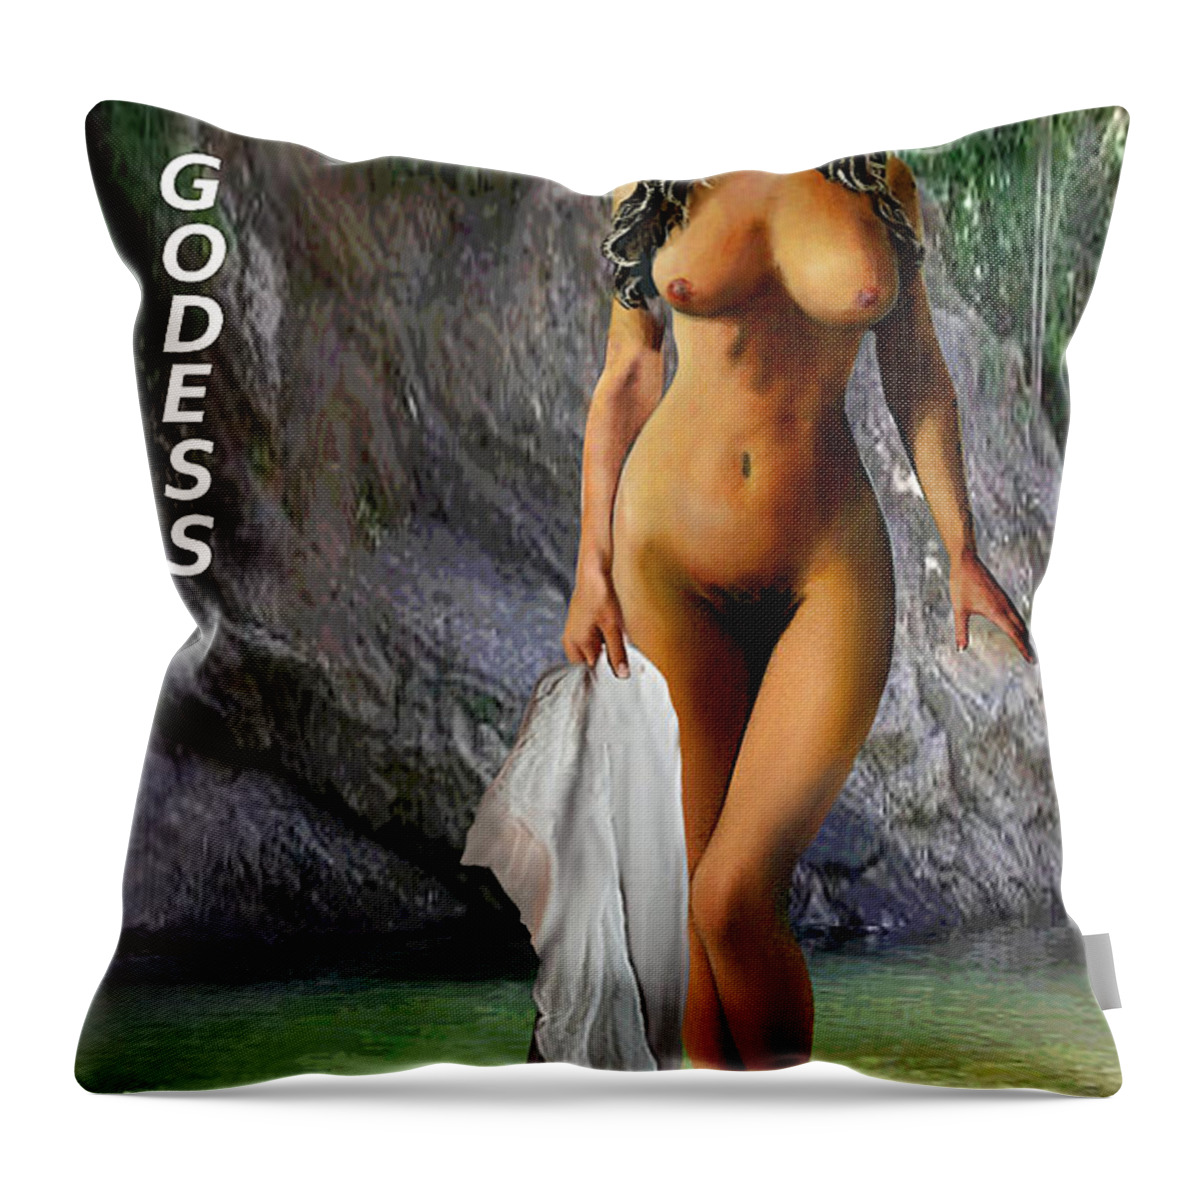 Fine Throw Pillow featuring the painting Original Female Nude Jean Goddess Venus Bathing Poster by G Linsenmayer